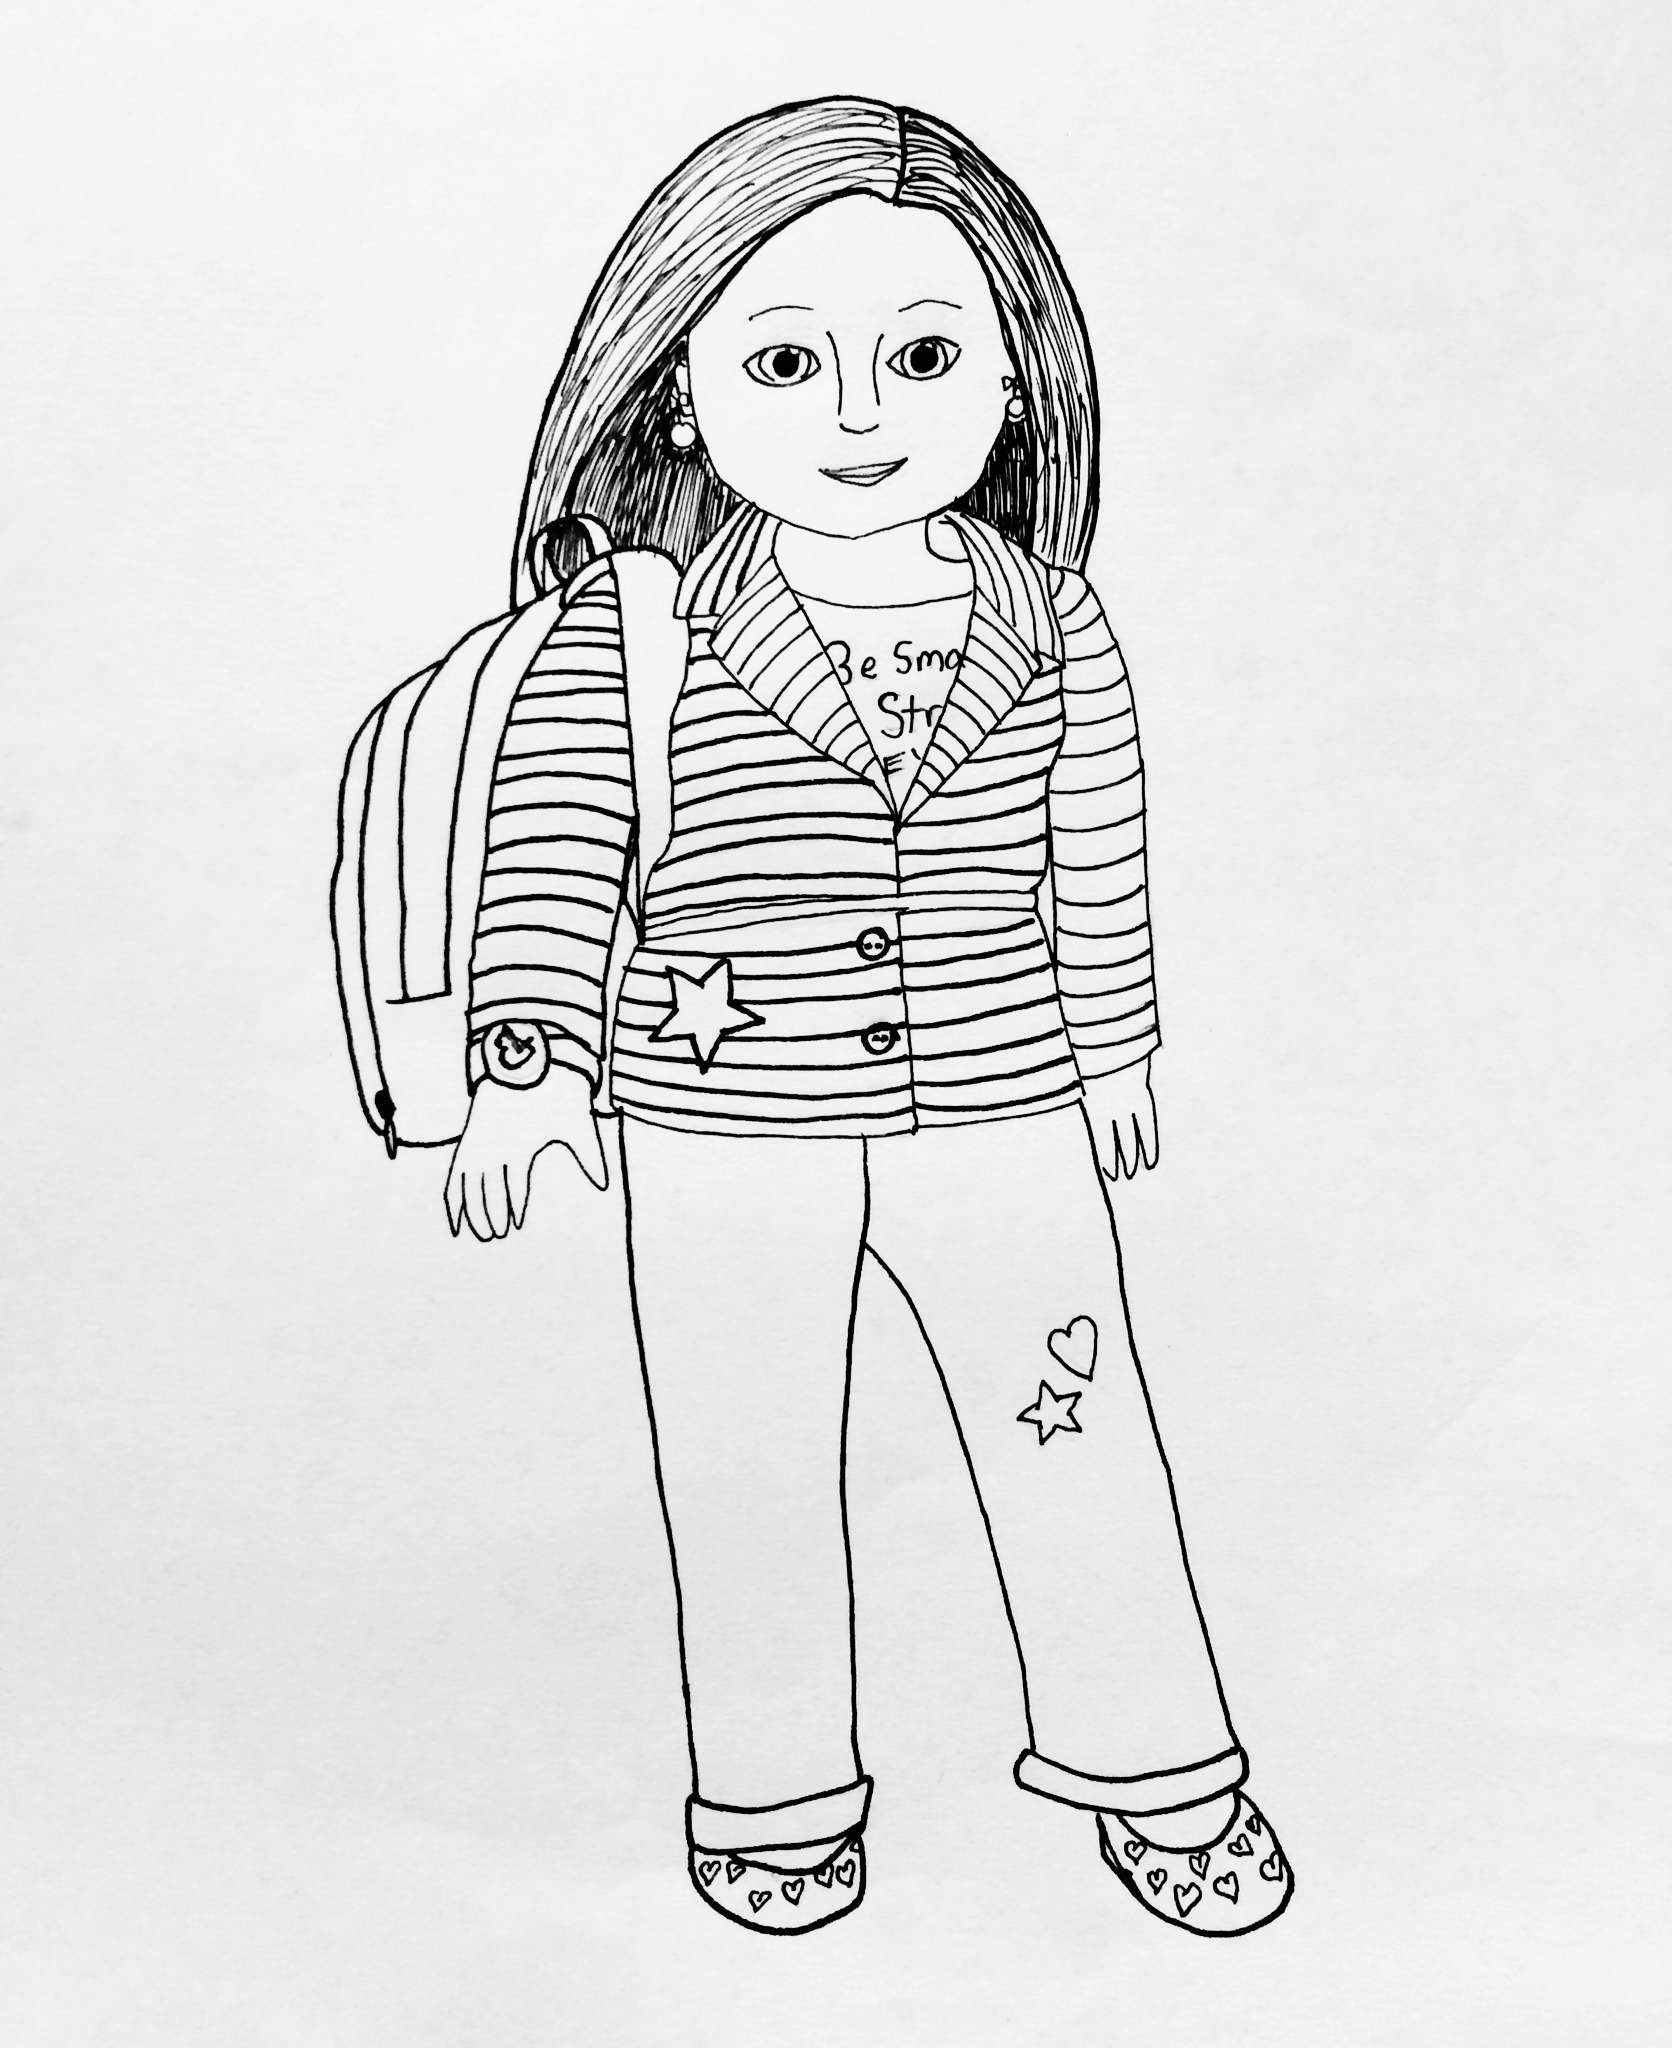 American girl doll coloring pages to download and print 